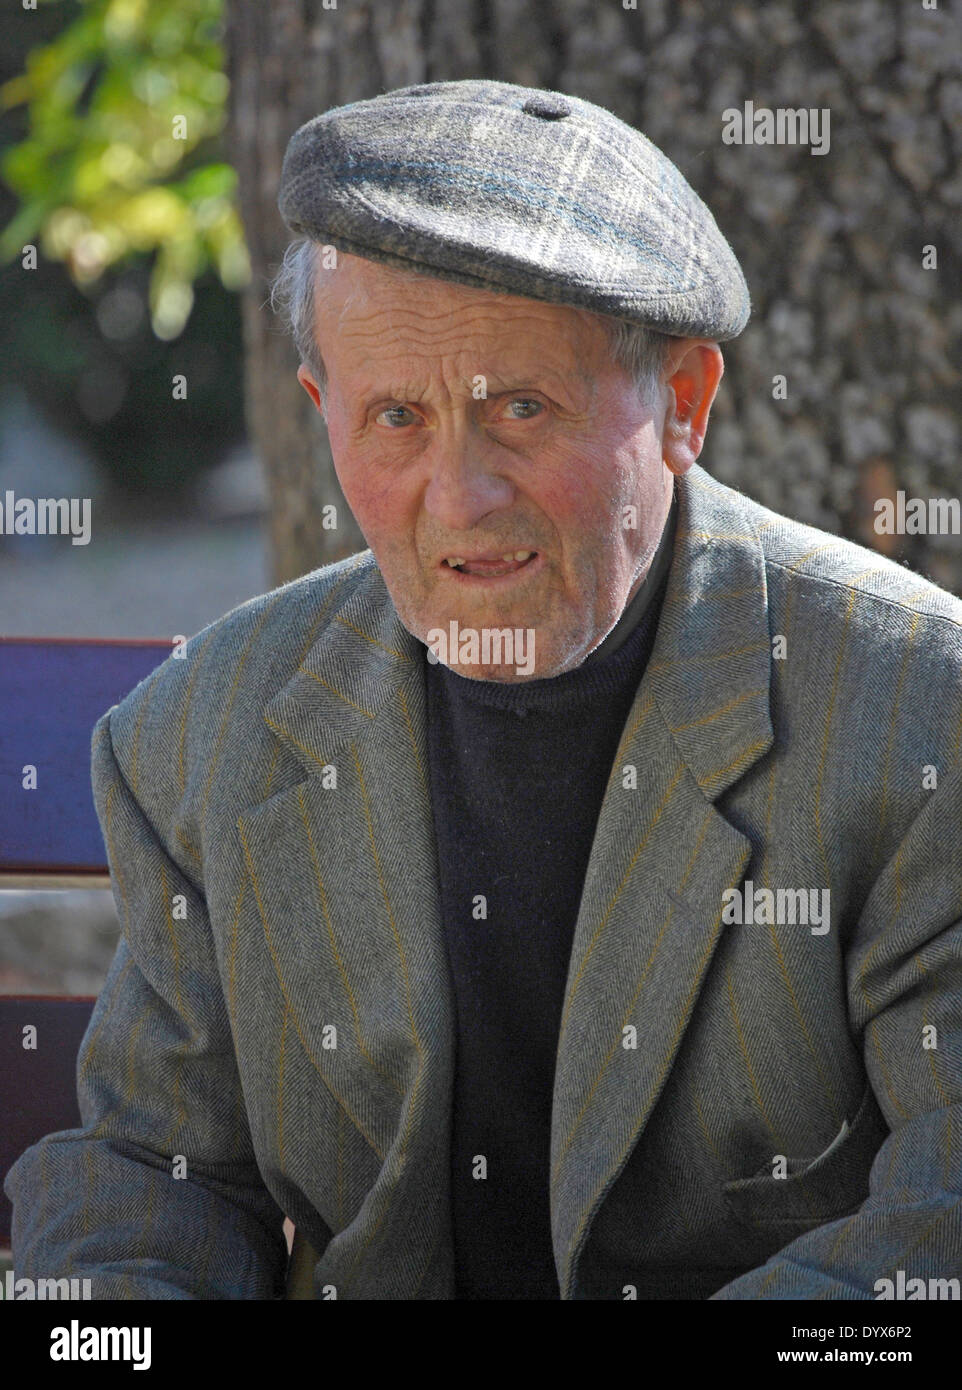 Pienza, Italy. Portrait of an older man in a cap sitting on a park bench. Stock Photo